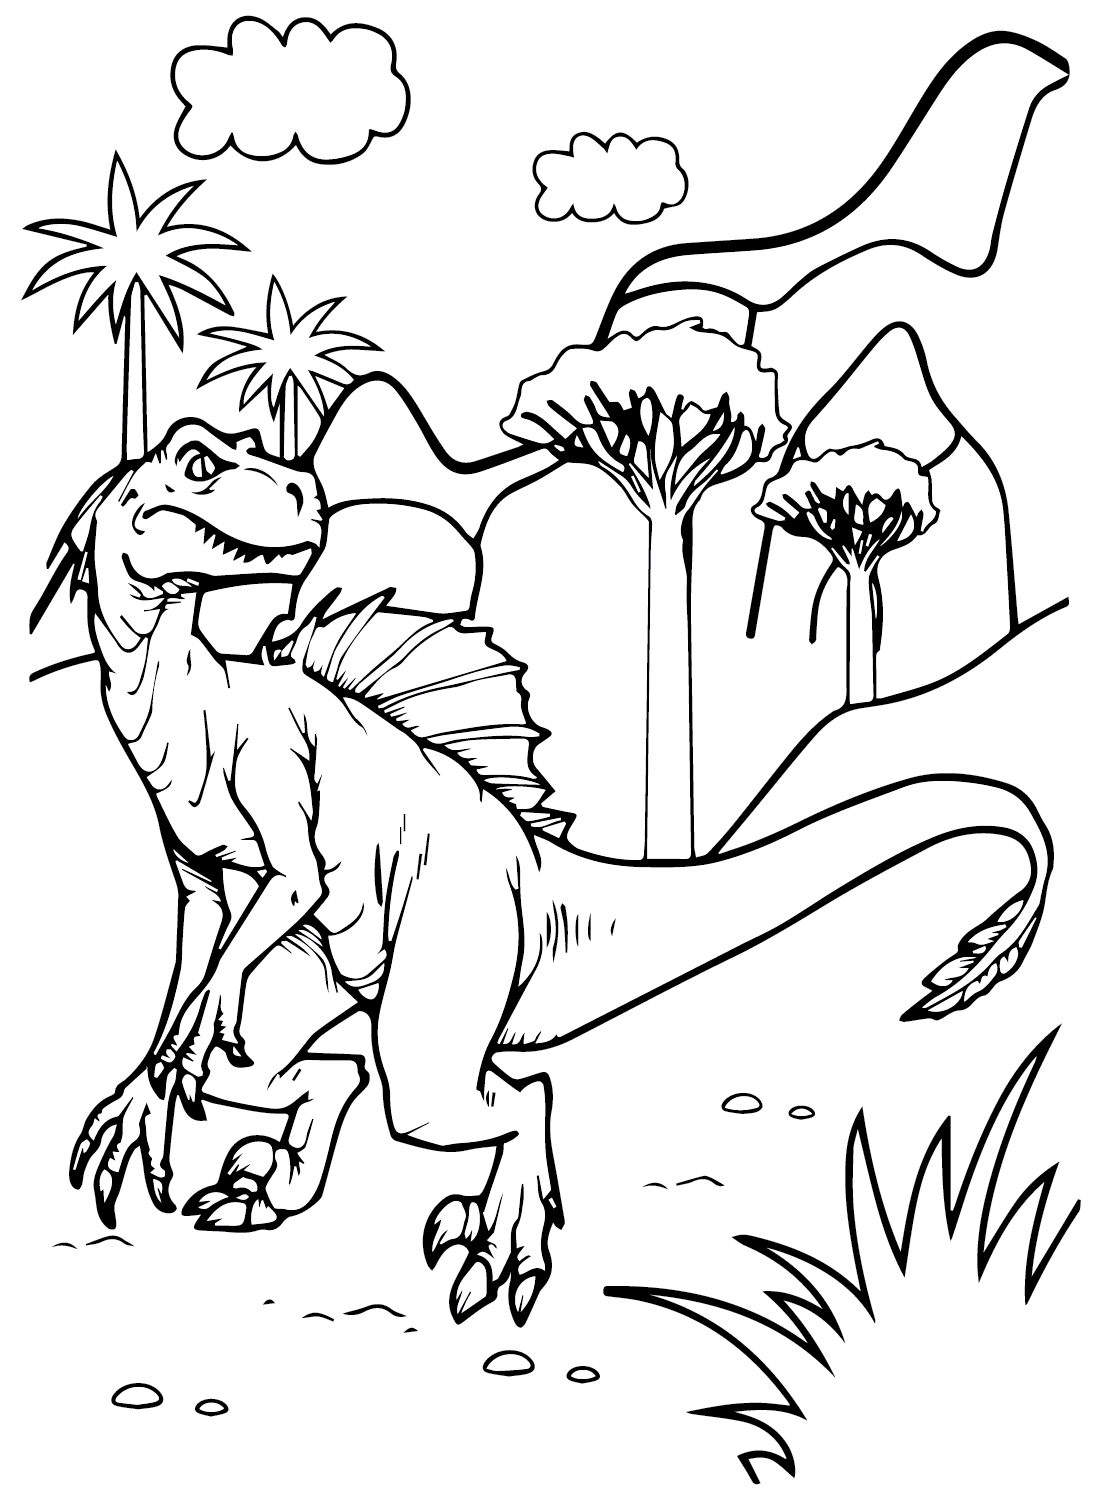 Spinosaurus Aegyptiacus Coloring Pages to Printable from Spinosaurus Aegyptiacus